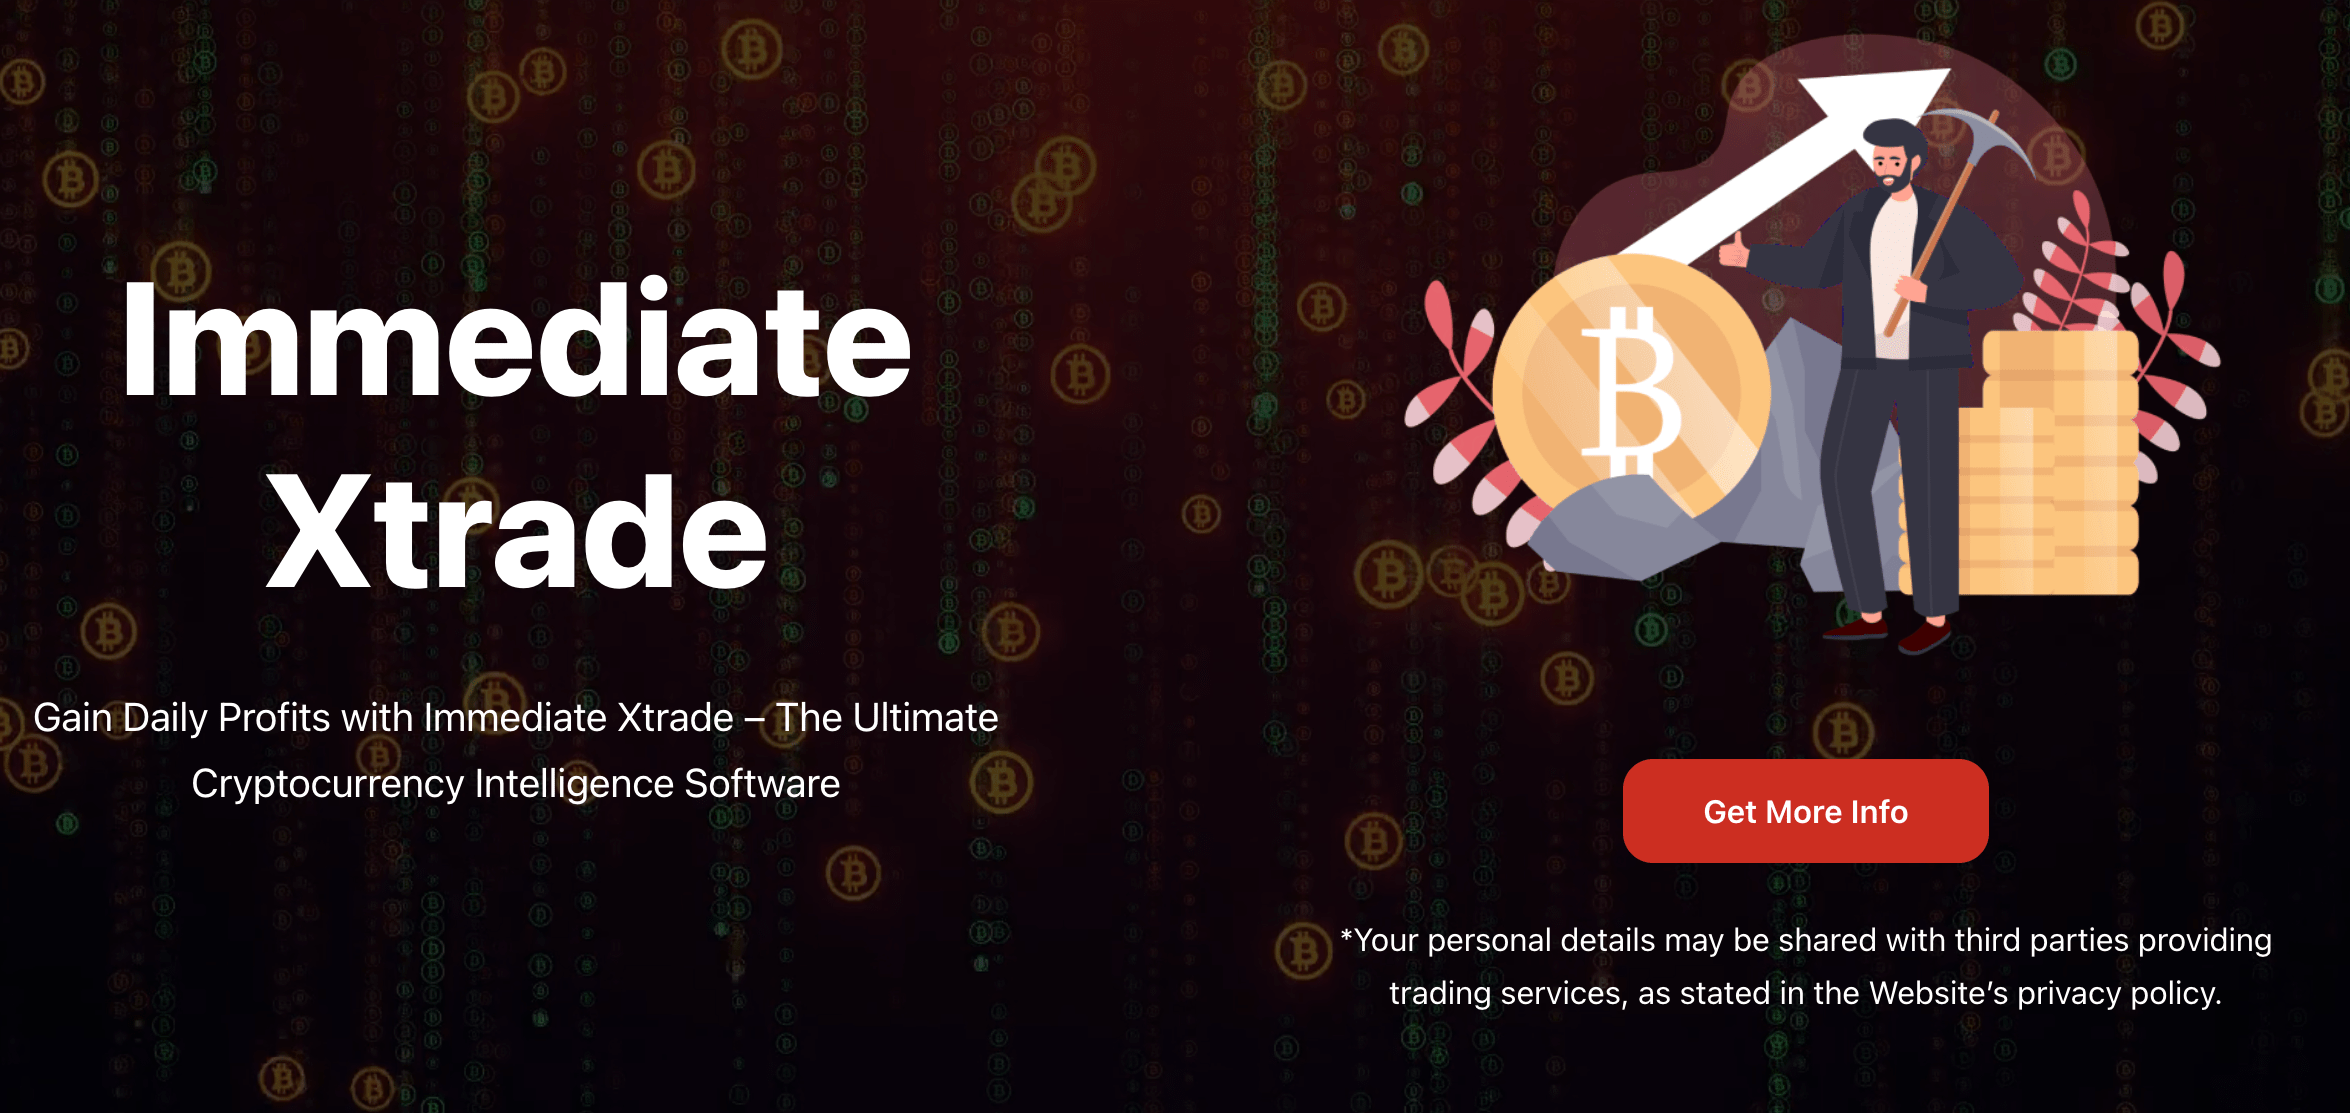 Immediate Xtrade Review - Scam or Legitimate Crypto Trading Platform